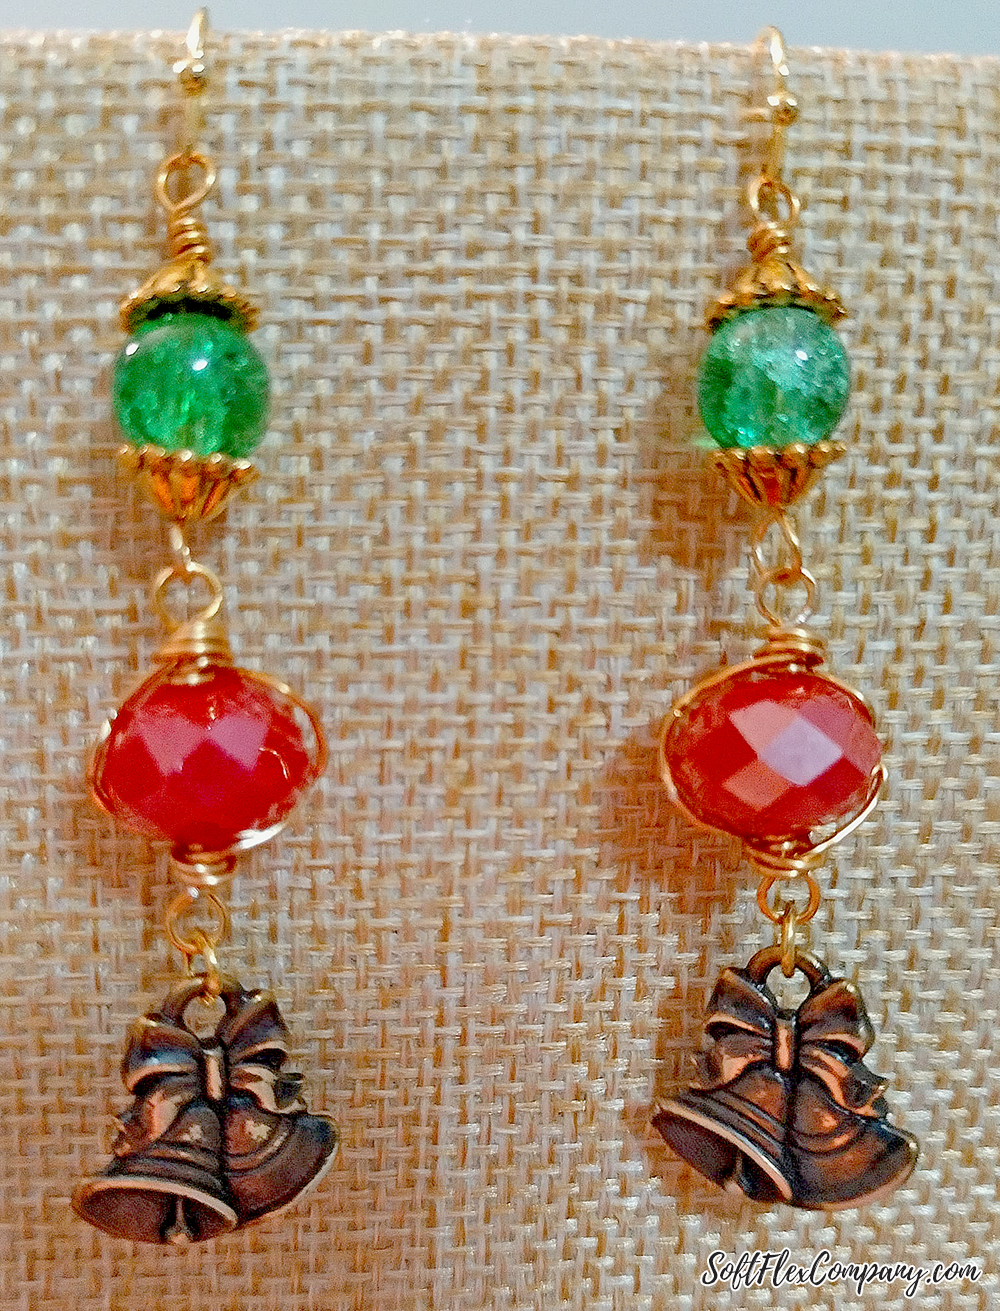 Retro Christmas Jewelry by Gale Loder